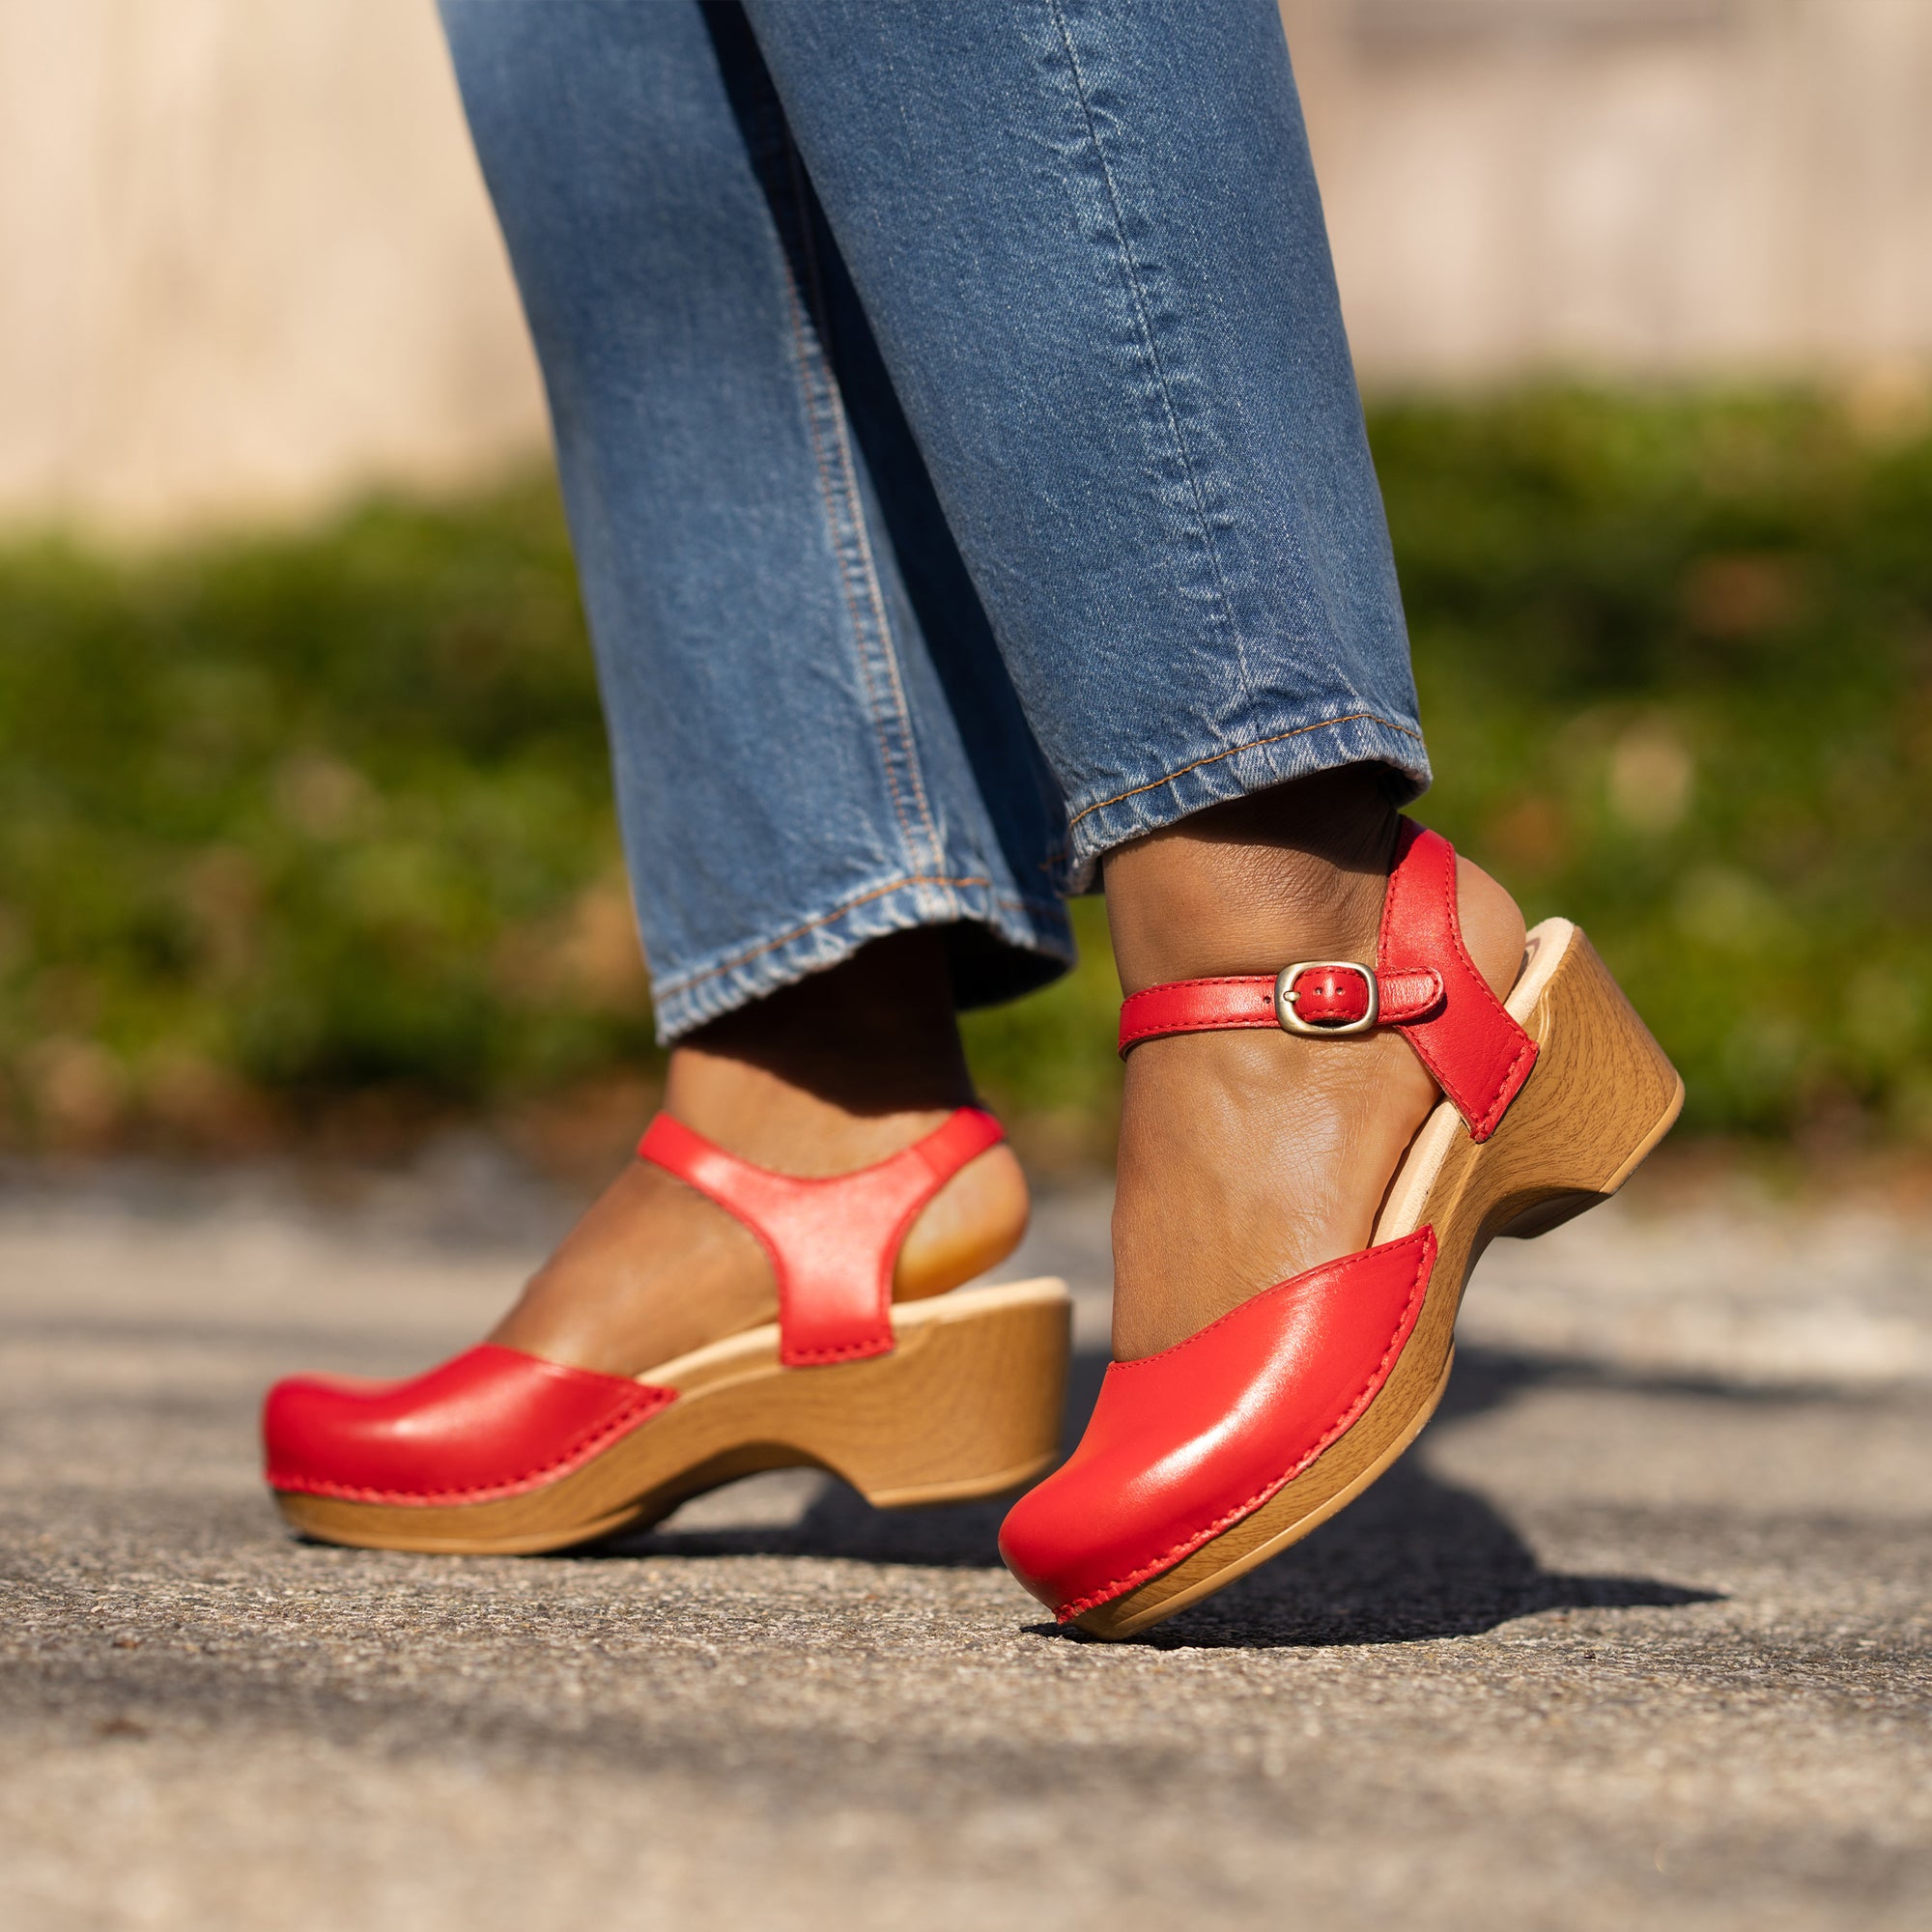 Red Mary Jane clog sandals shown on foot.